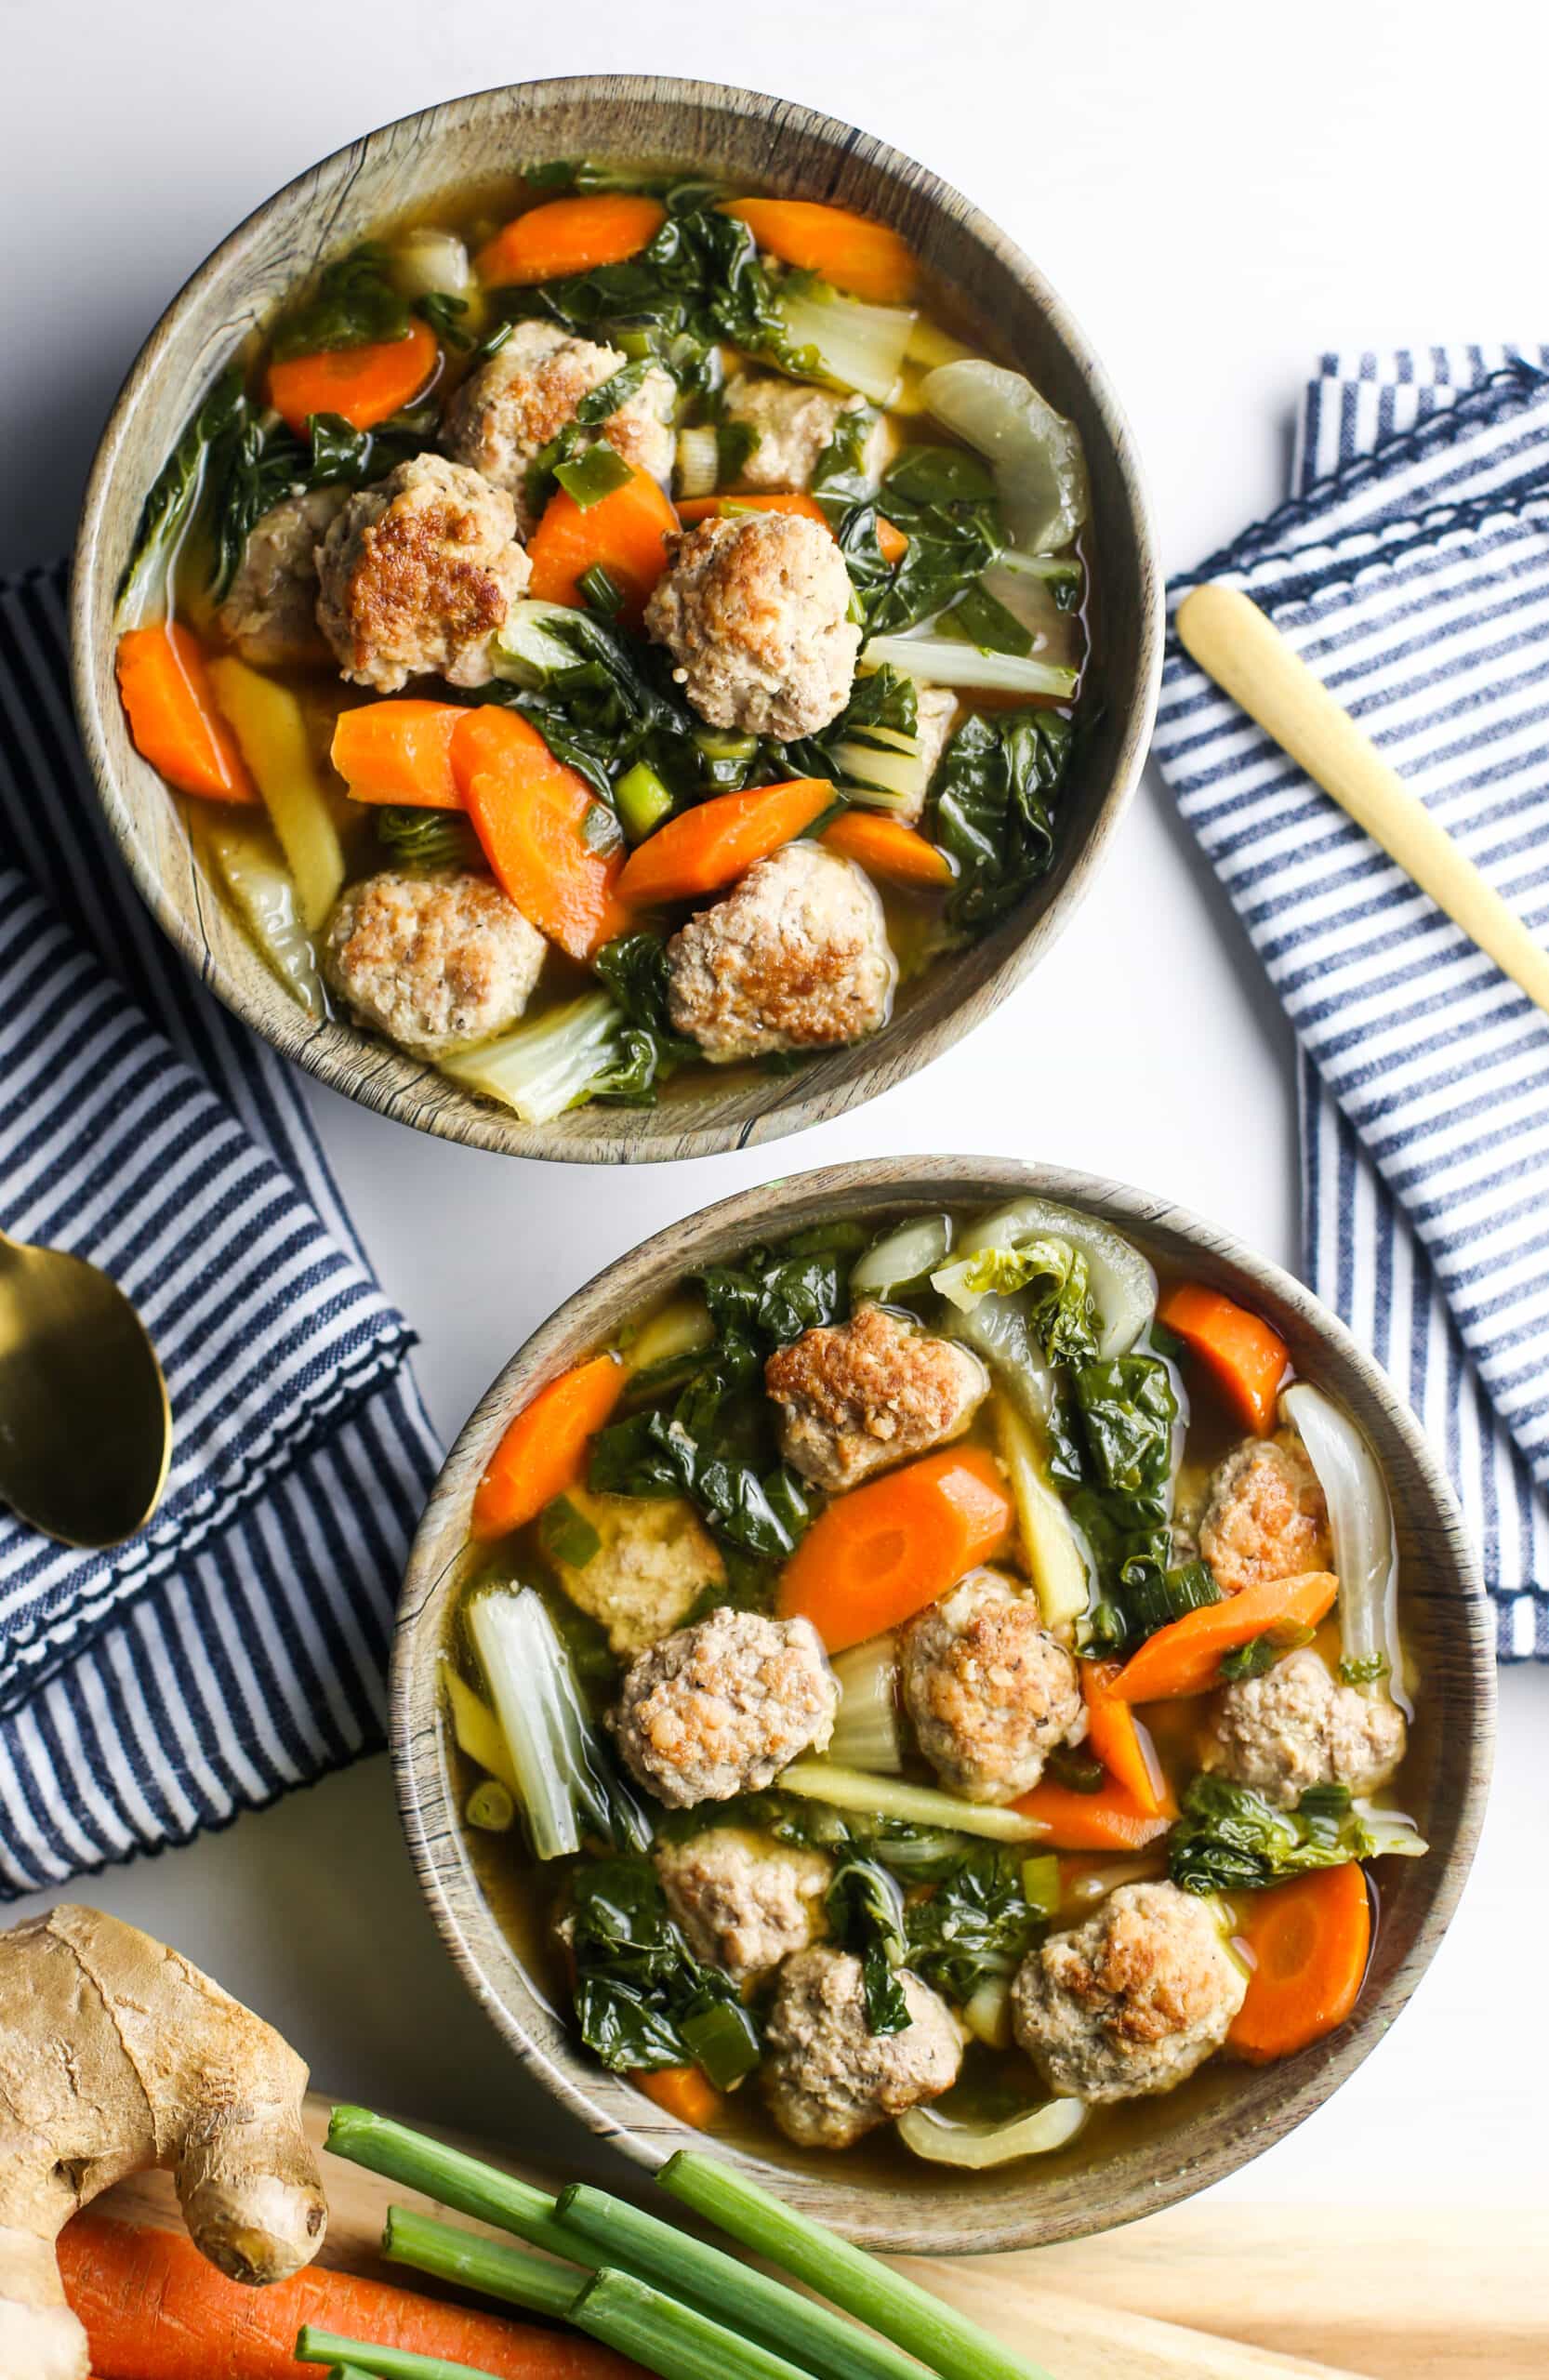 Ginger Pork Meatball Soup with Bok Choy